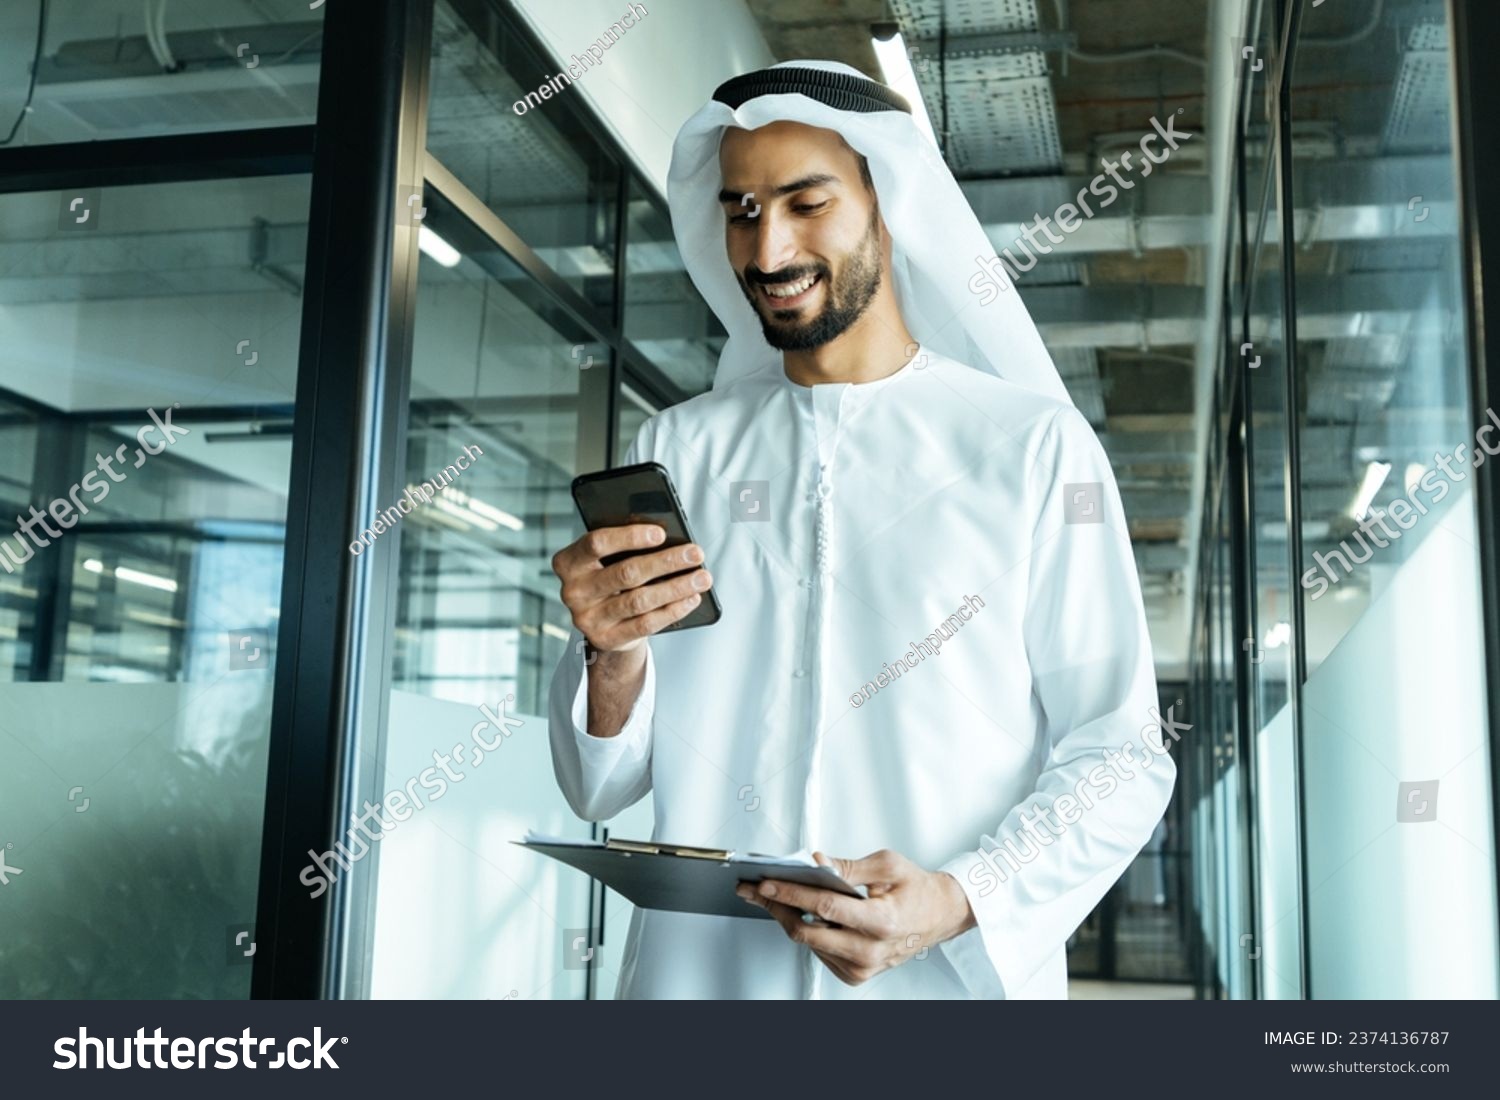 handsome man with dish dasha working in his business office of Dubai. Portraits of a successful businessman in traditional emirates white dress. Concept about middle eastern cultures. #2374136787